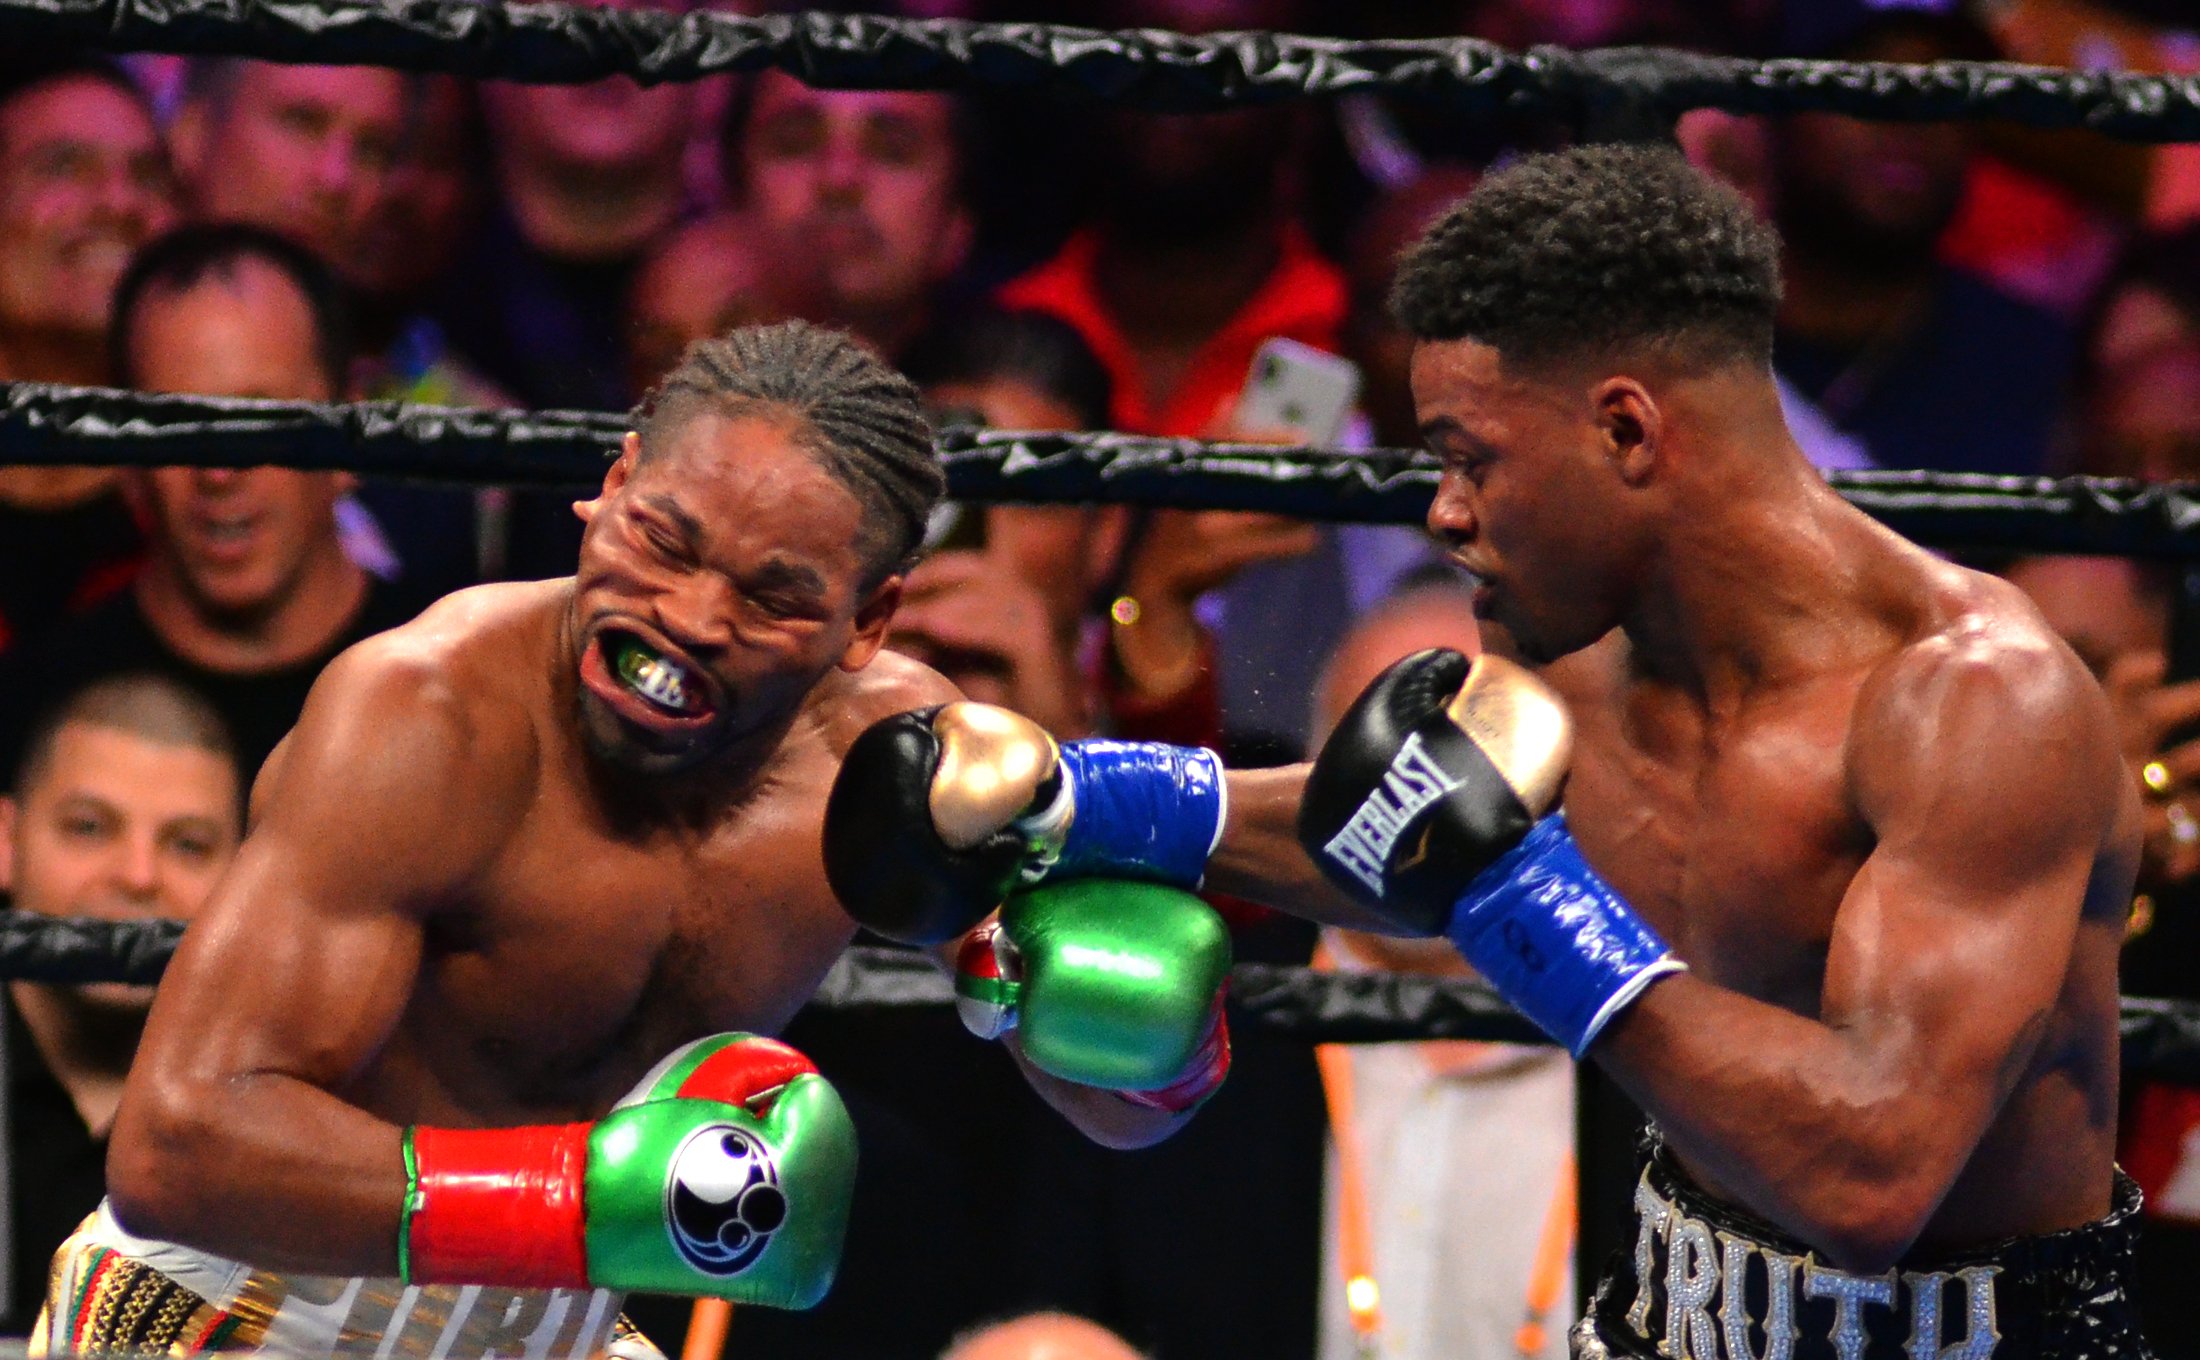 Errol Spence Jr. (right) scored a knockdown of Shawn Porter in the 11th and prevailed by scores of 116-111 on two cards to unify two of the welterweight title belts. Photo by German Villasenor